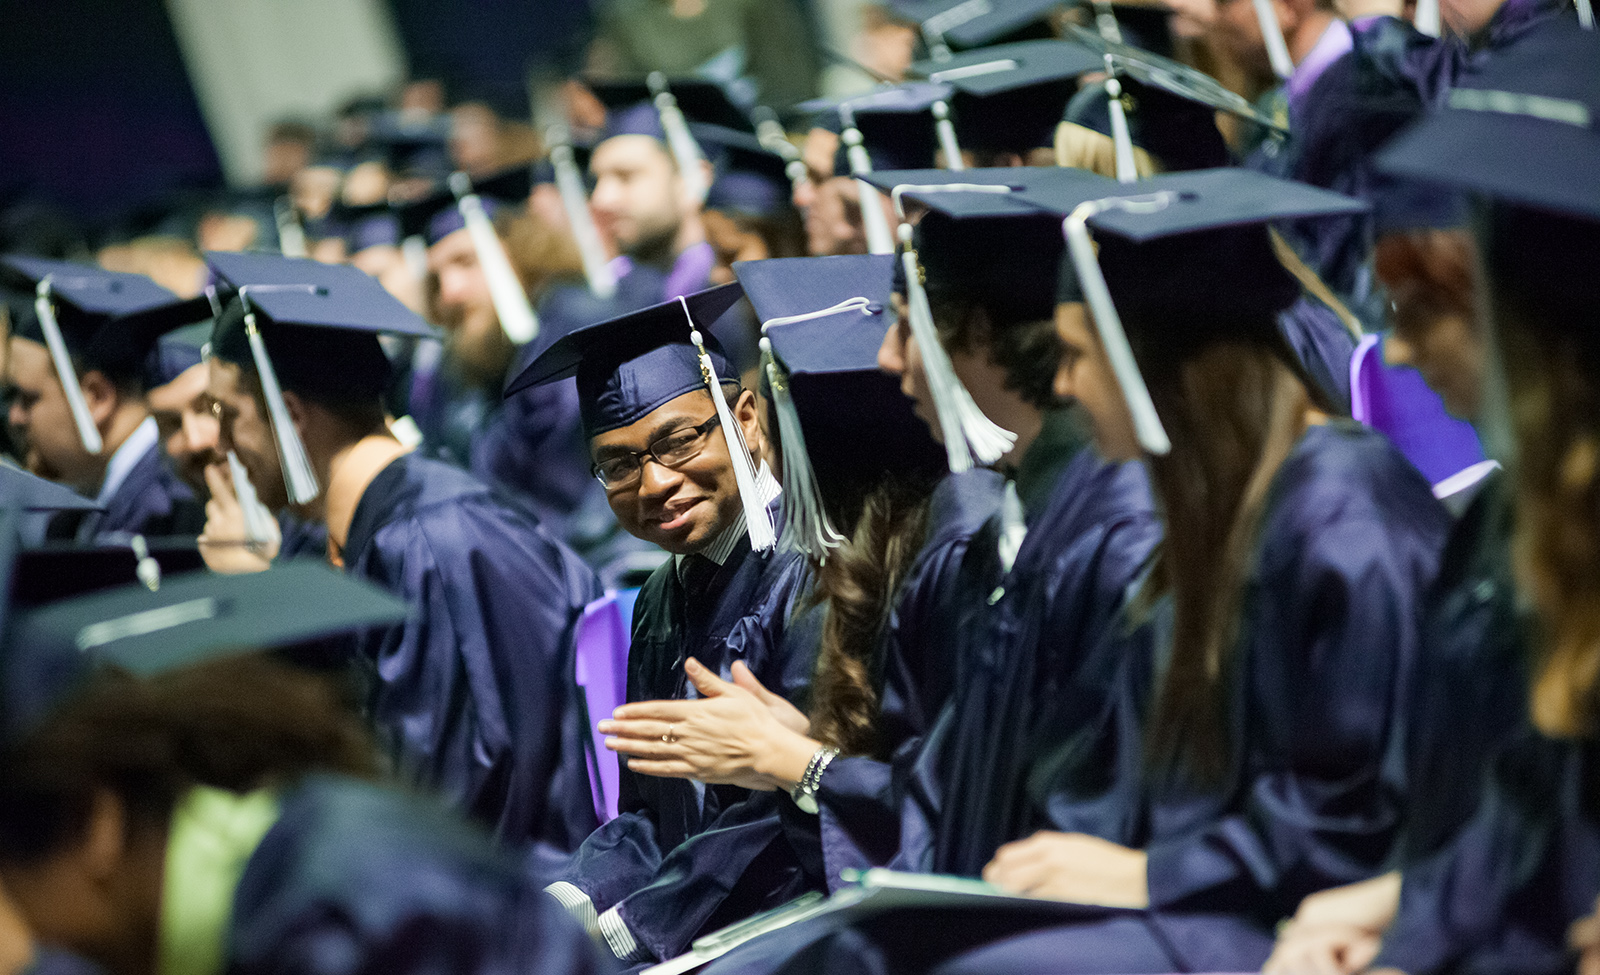 A Penn State graduate smiles at his peers during the commencement ceremony